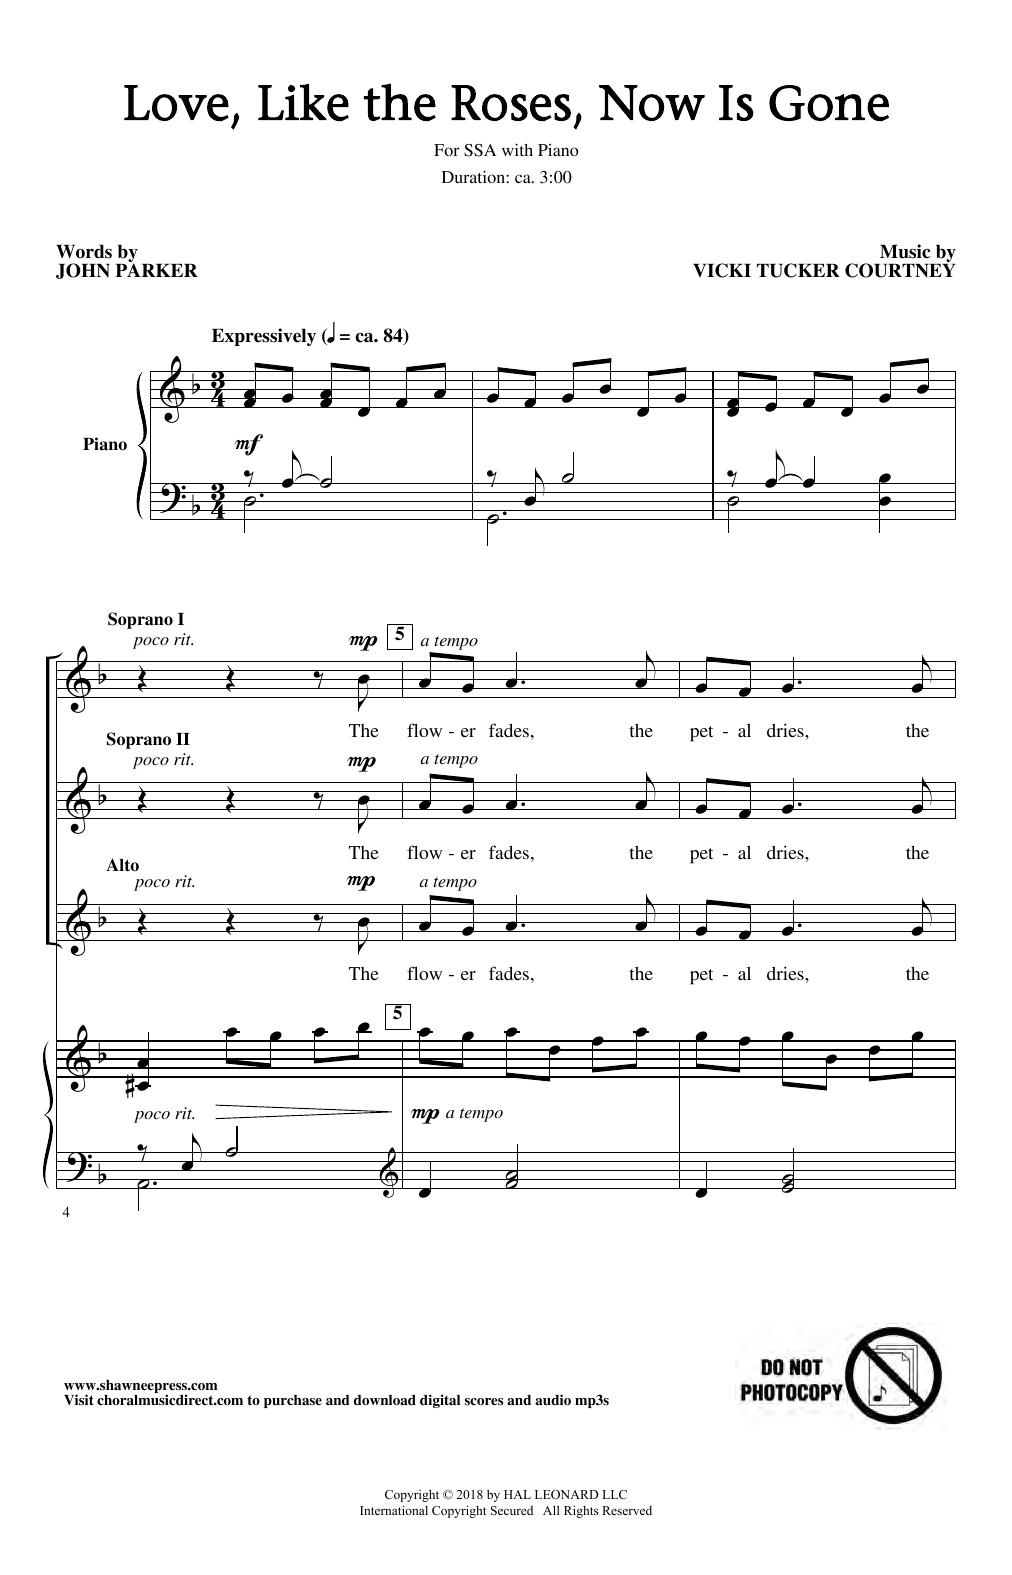 Download Vicki Tucker Courtney Love, Like The Roses, Now Is Gone Sheet Music